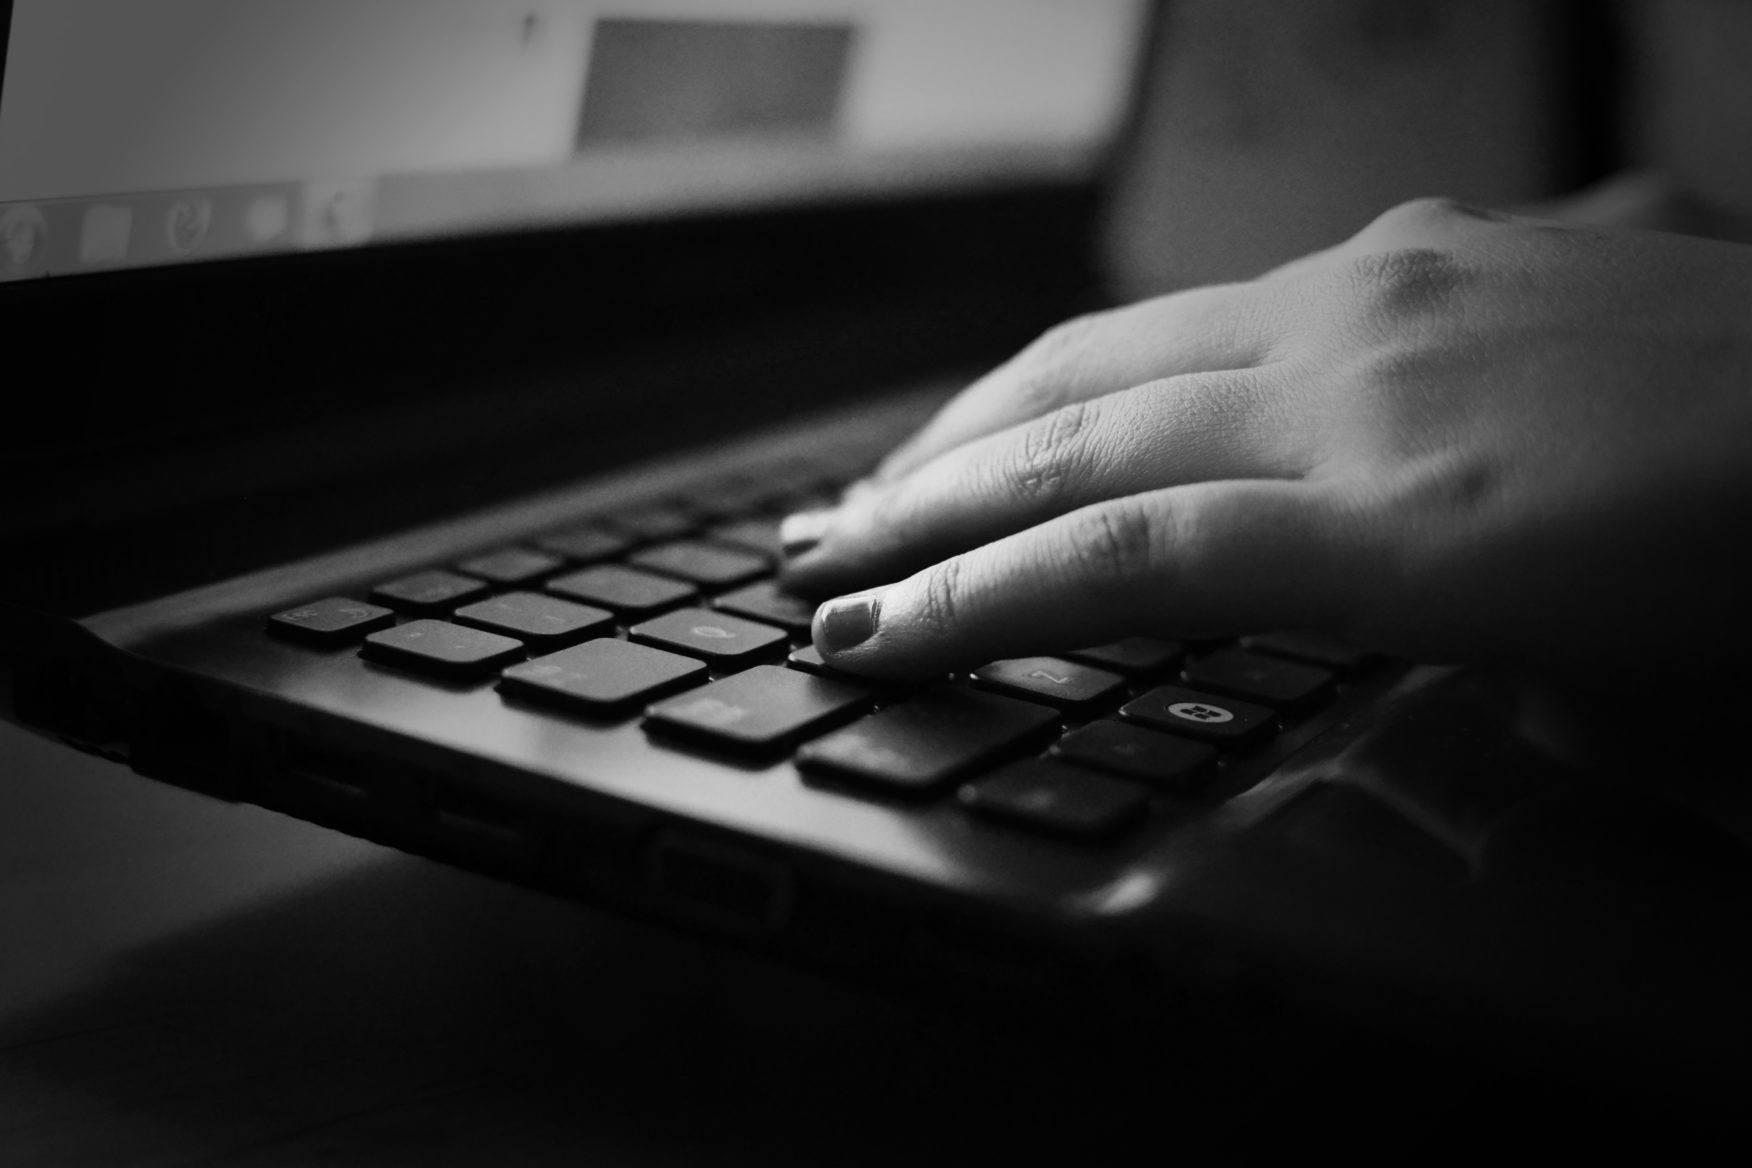 woman's hand on top of a laptop keyboard